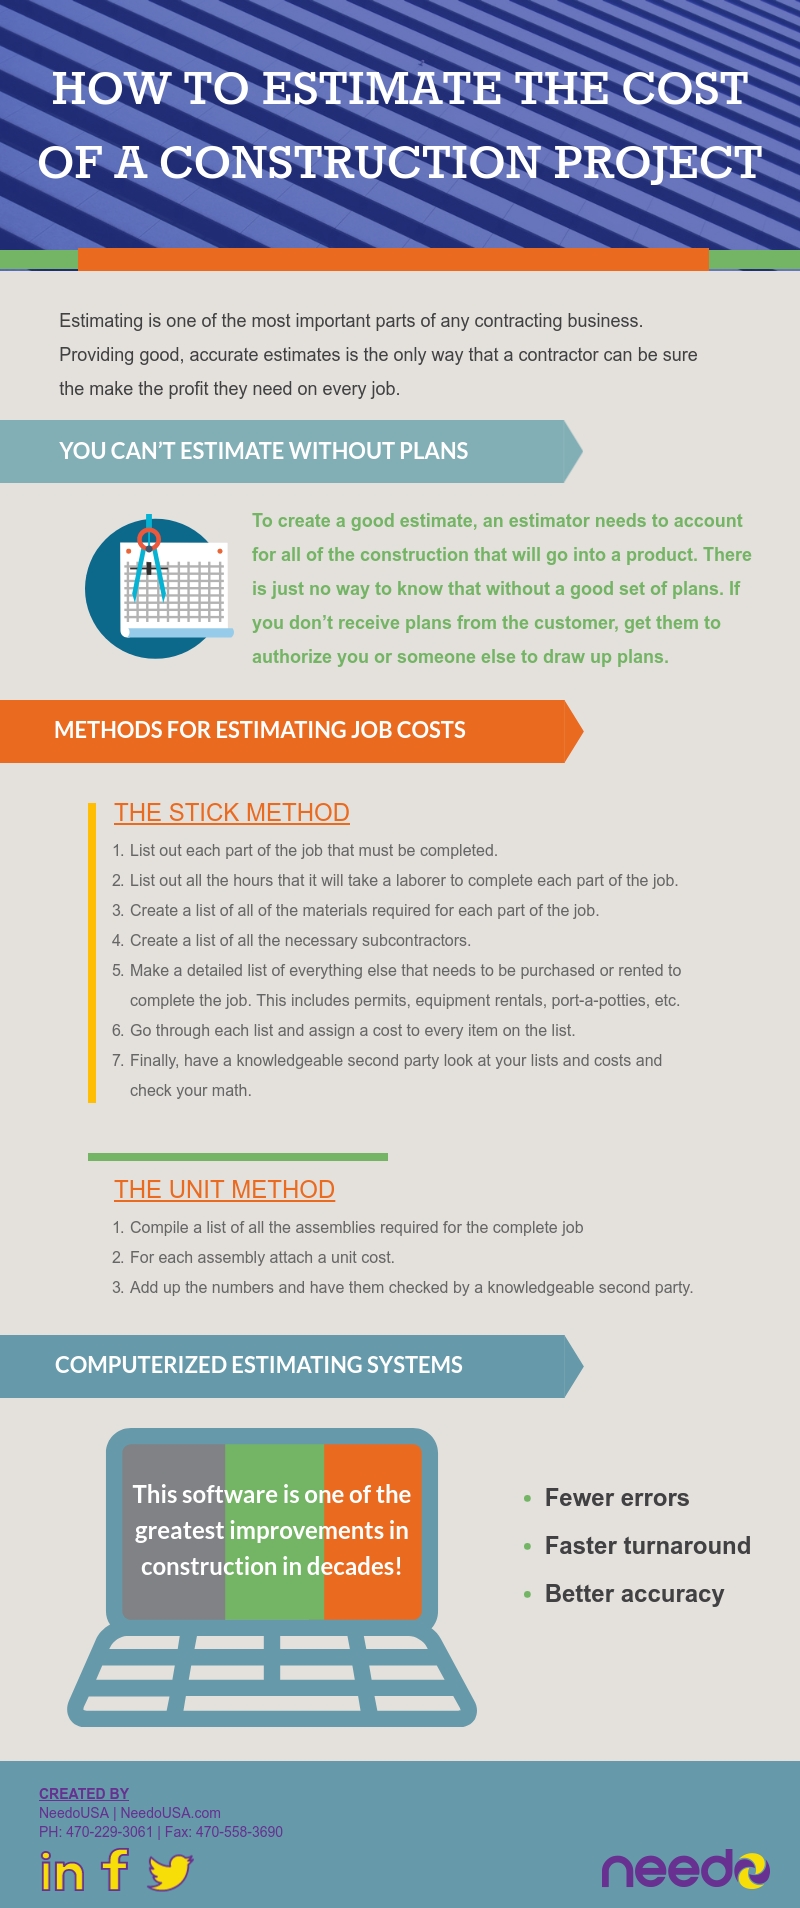 How to Estimate the Cost of a Construction Project [infographic]